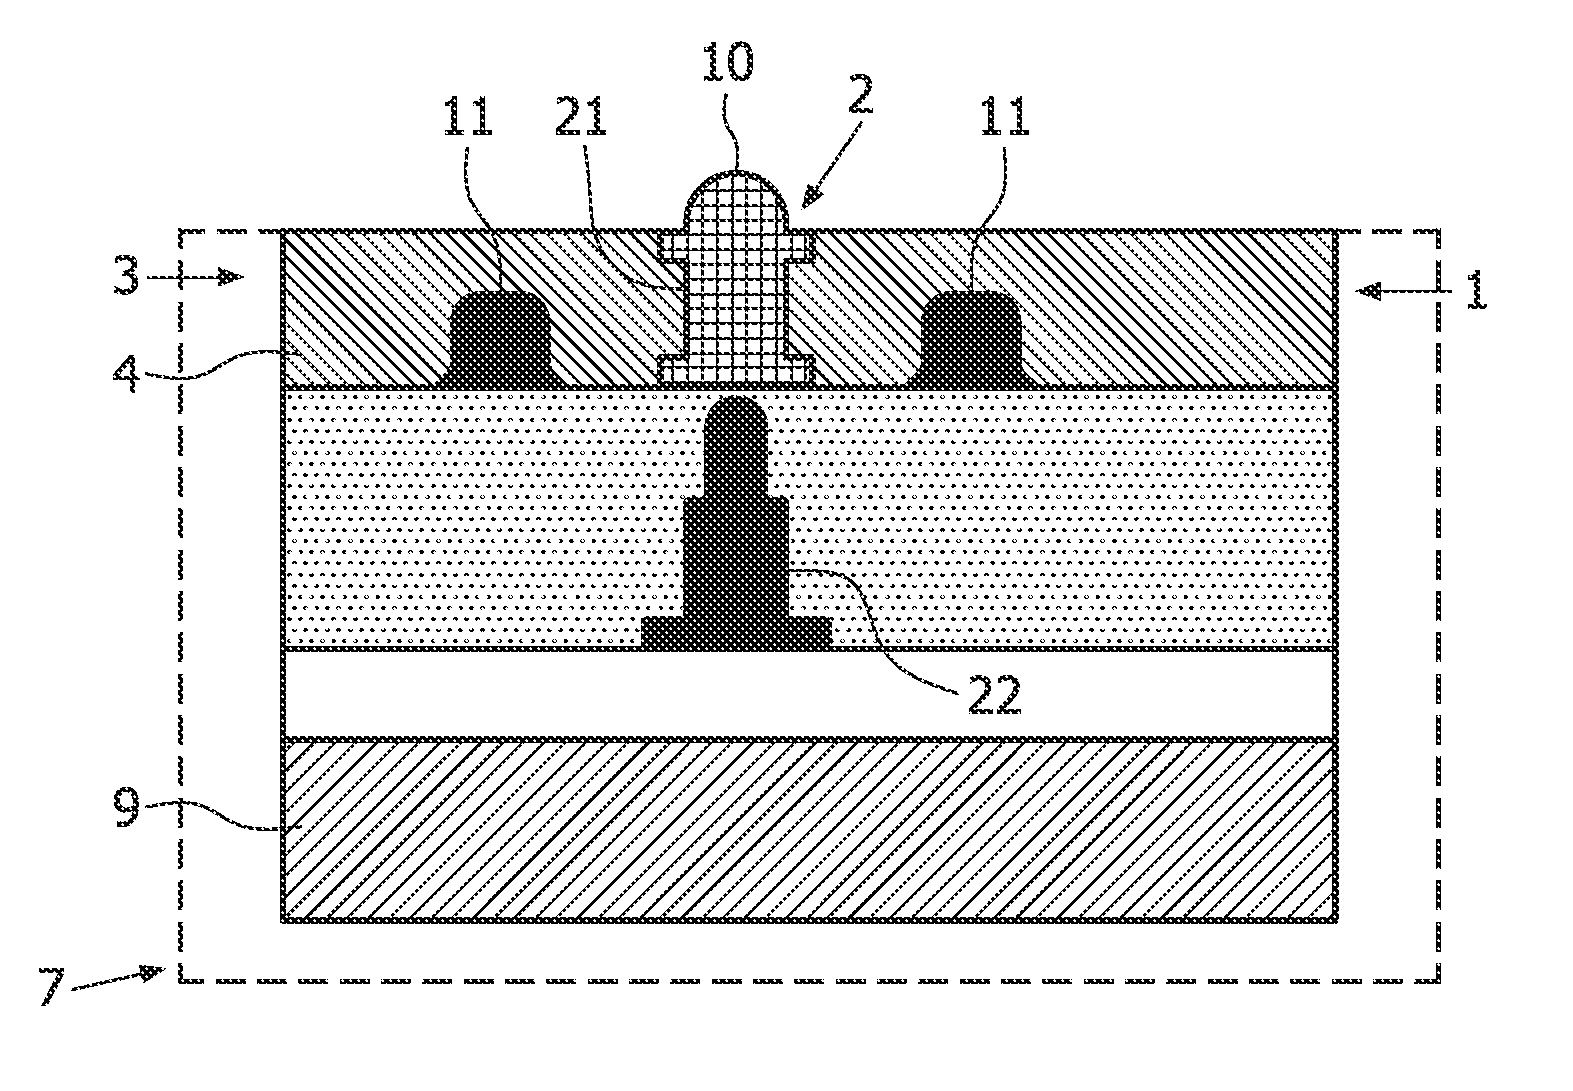 Electrical device with contact assembly